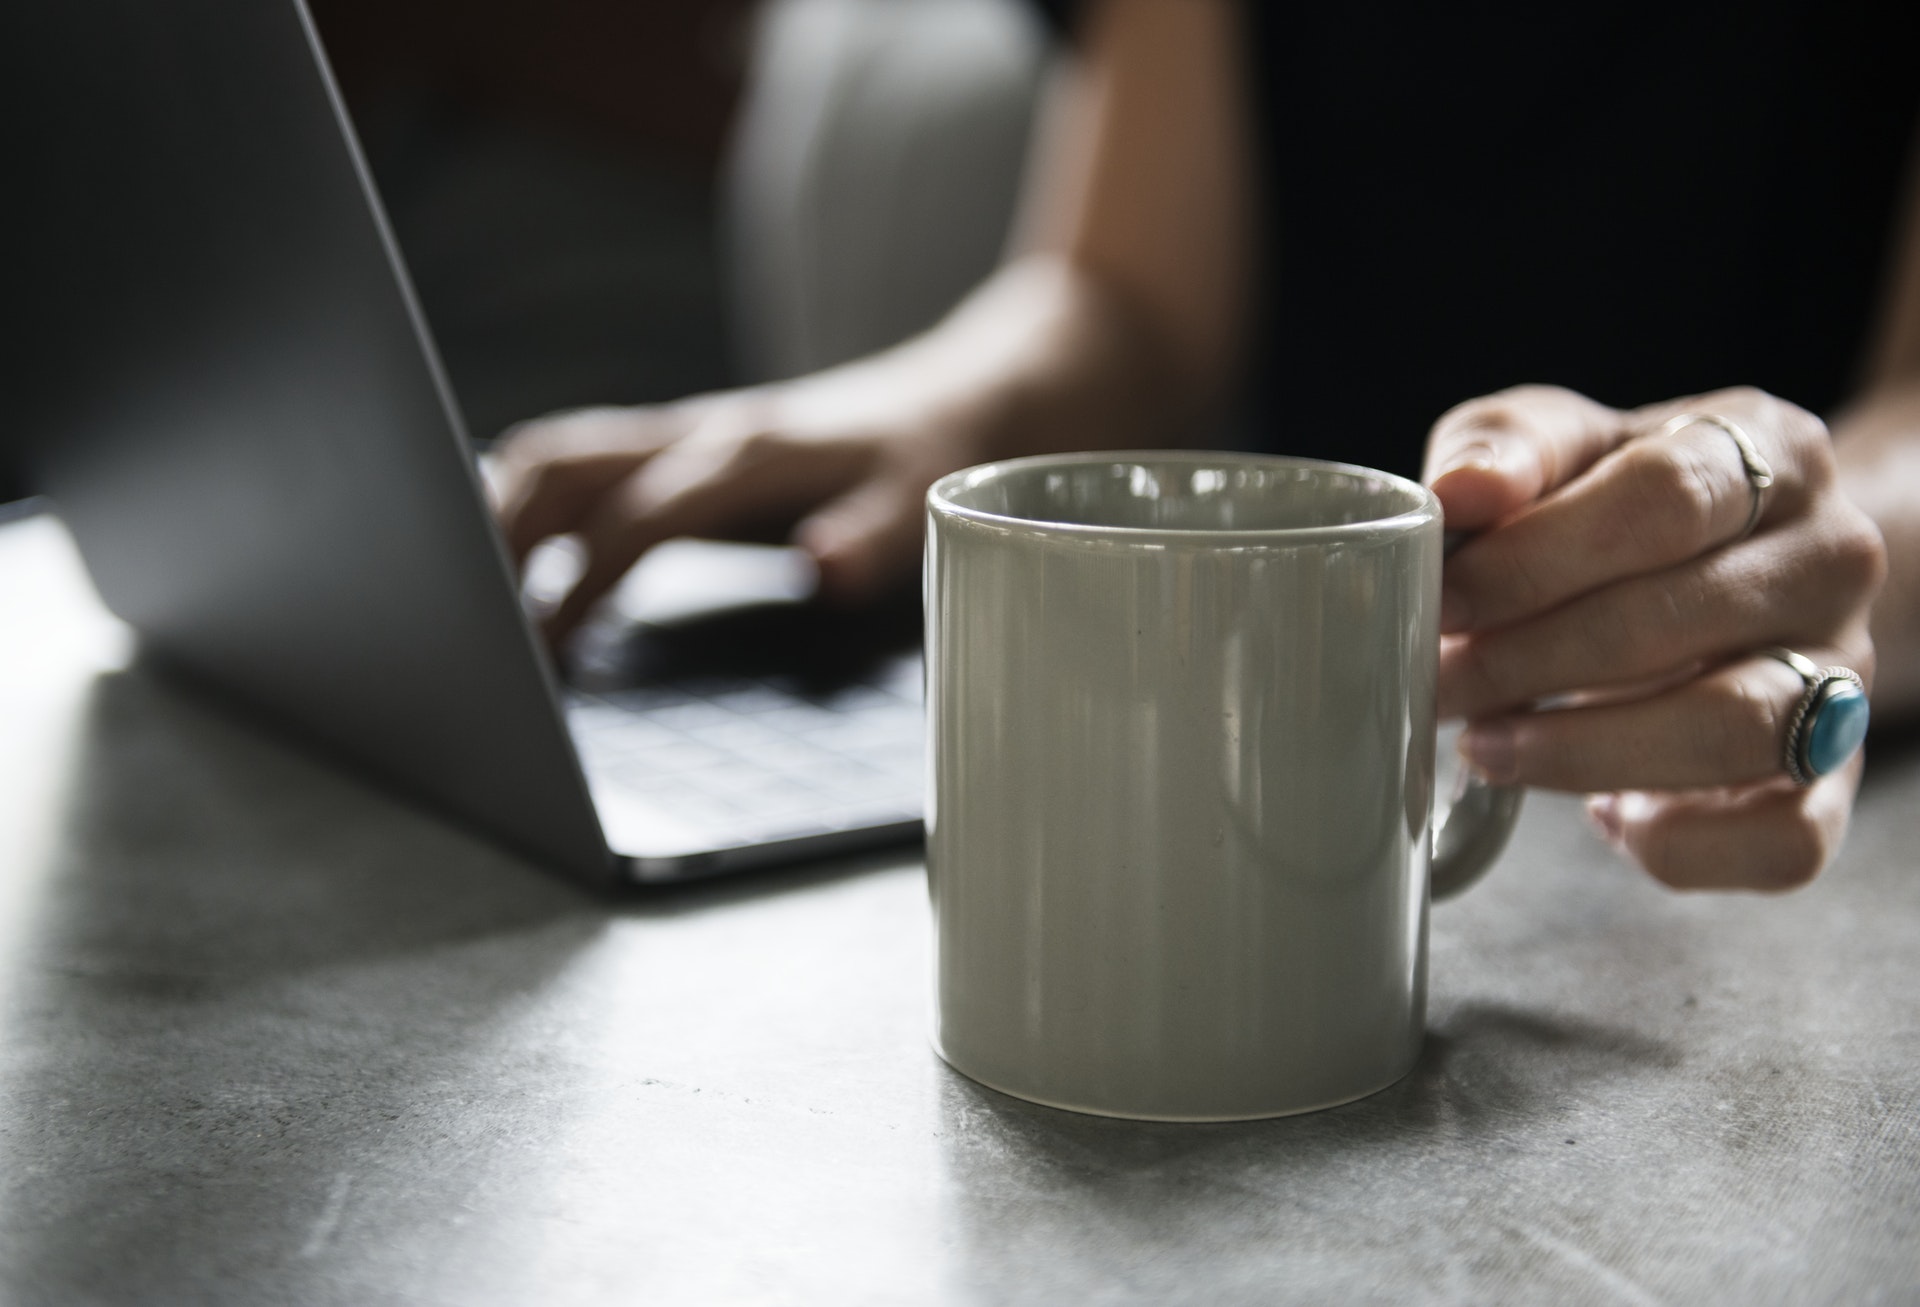 This is an image of a woman on her computer, holding a coffee mug.